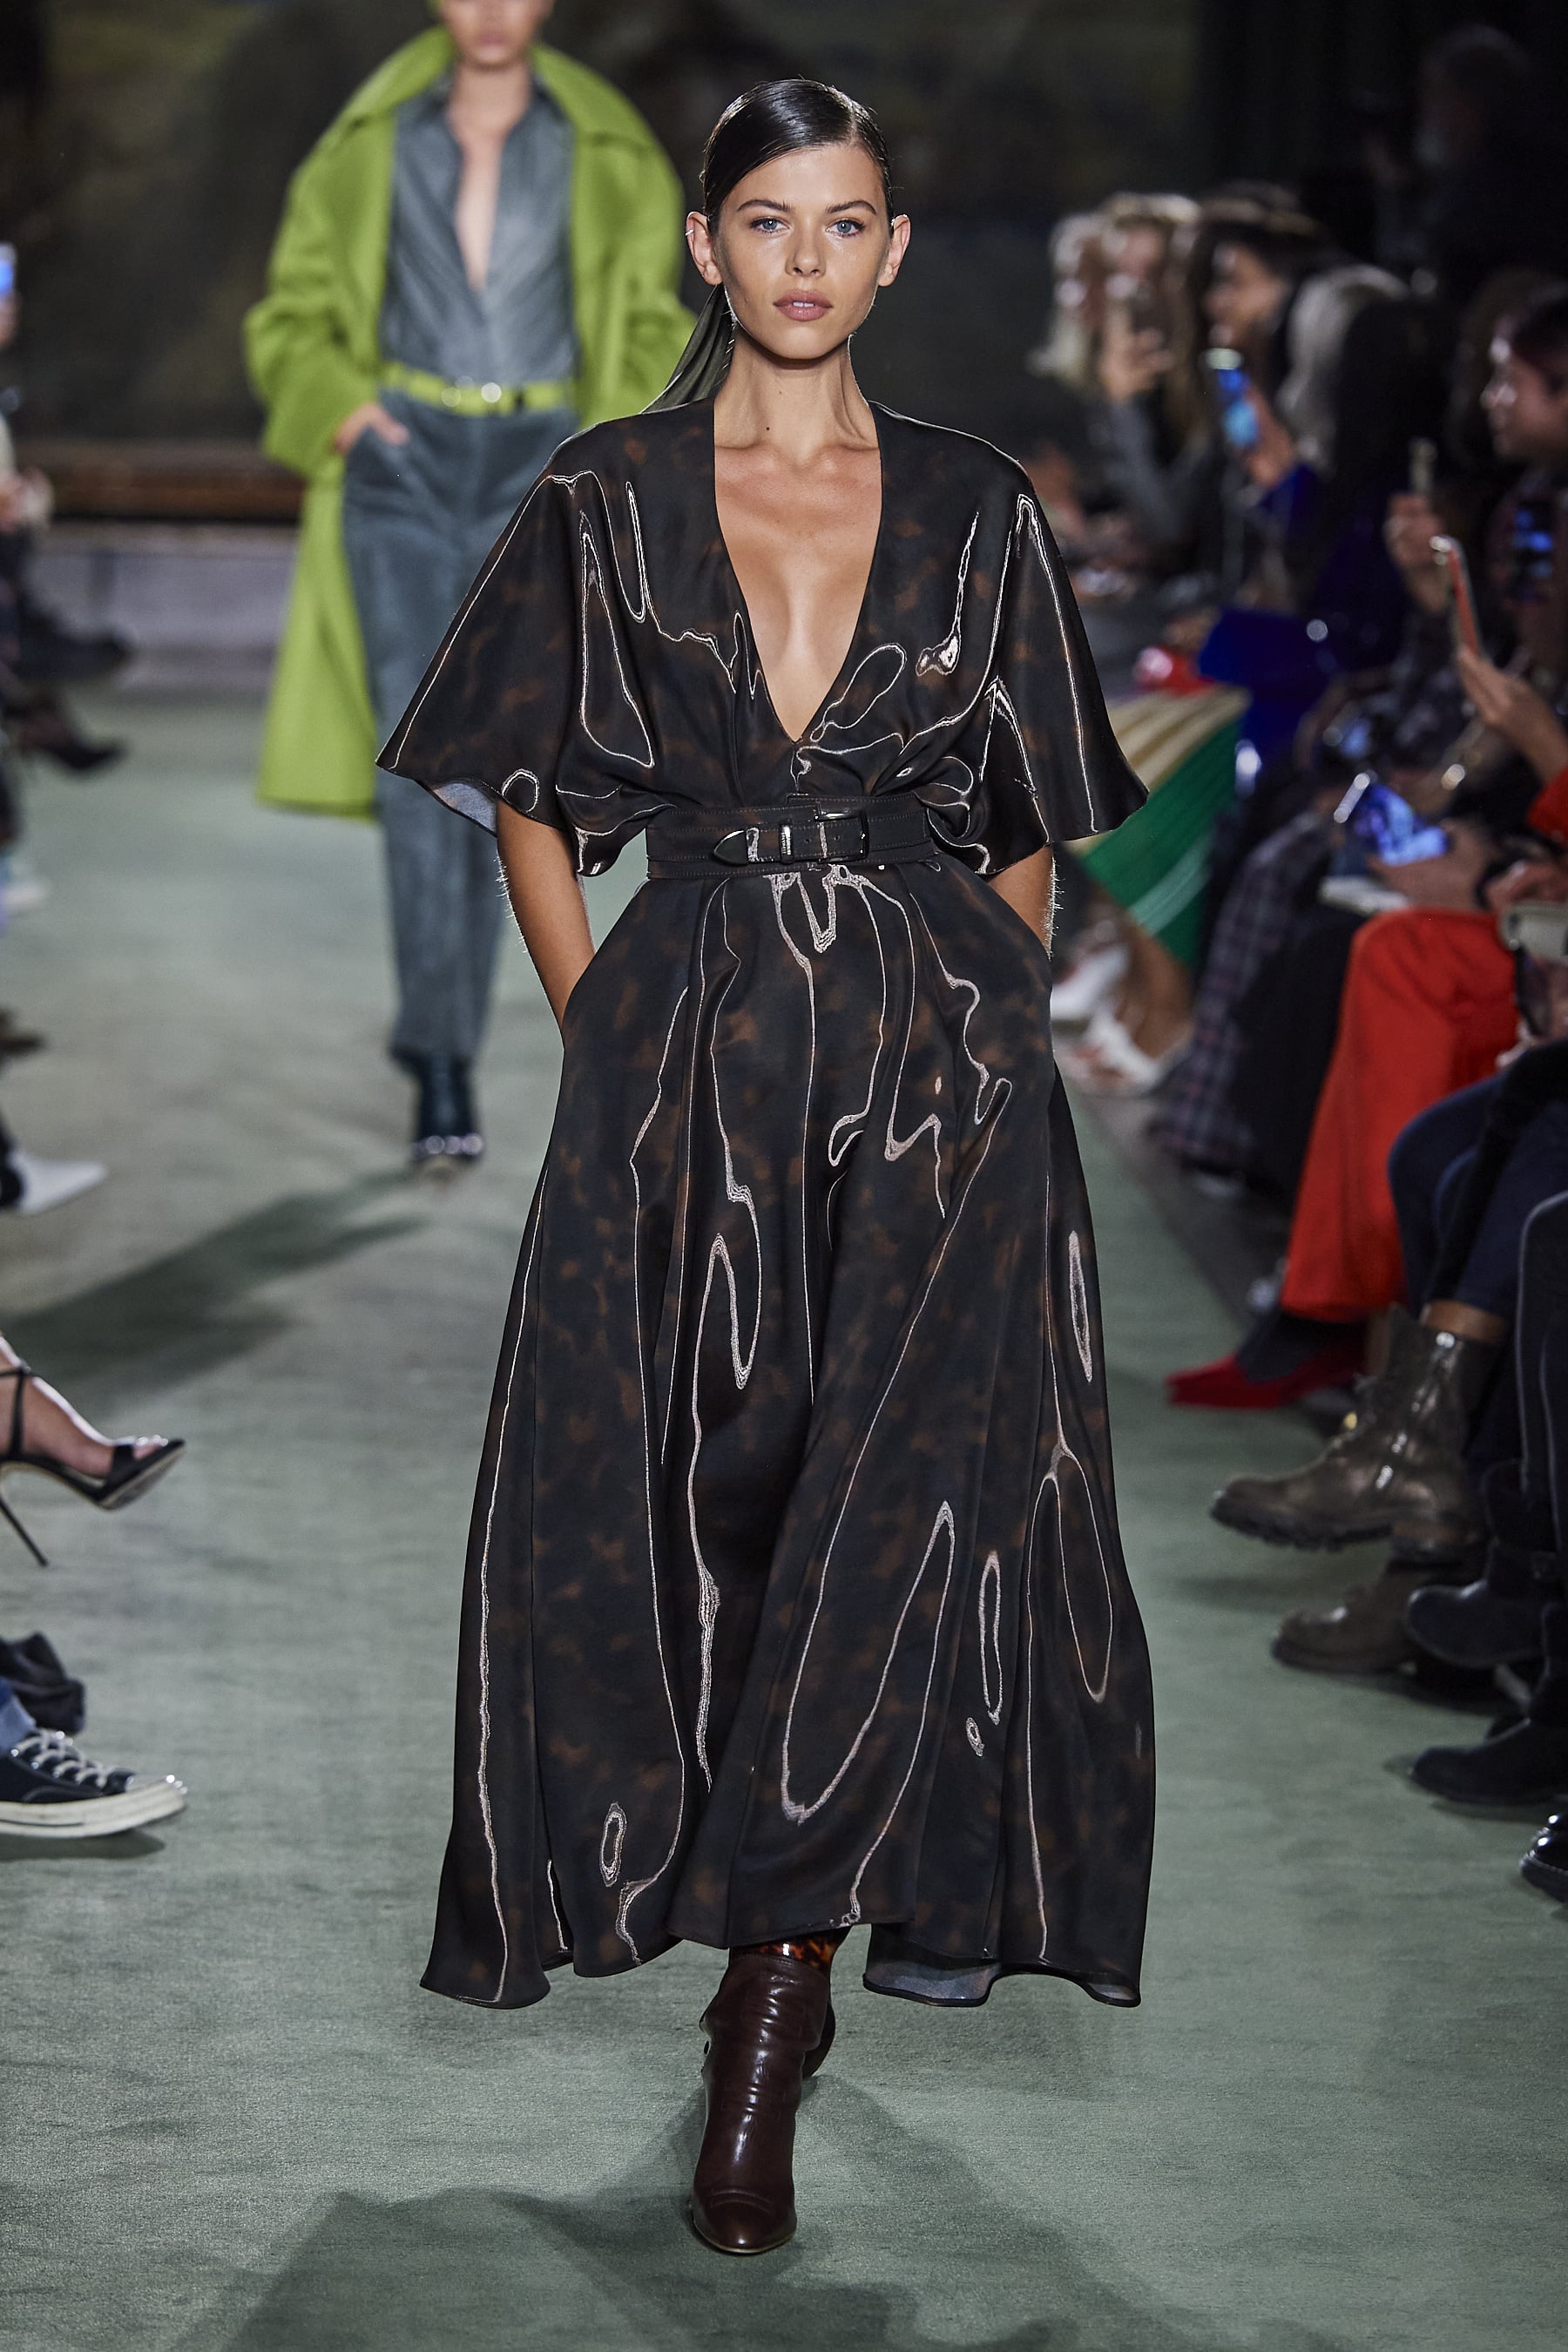 Brandon Maxwell Fall Winter 2020 Collection, I Wasn't Ready for the  Glamour (and Navarro Cheering) at Brandon Maxwell's Fall 2020 Runway Show